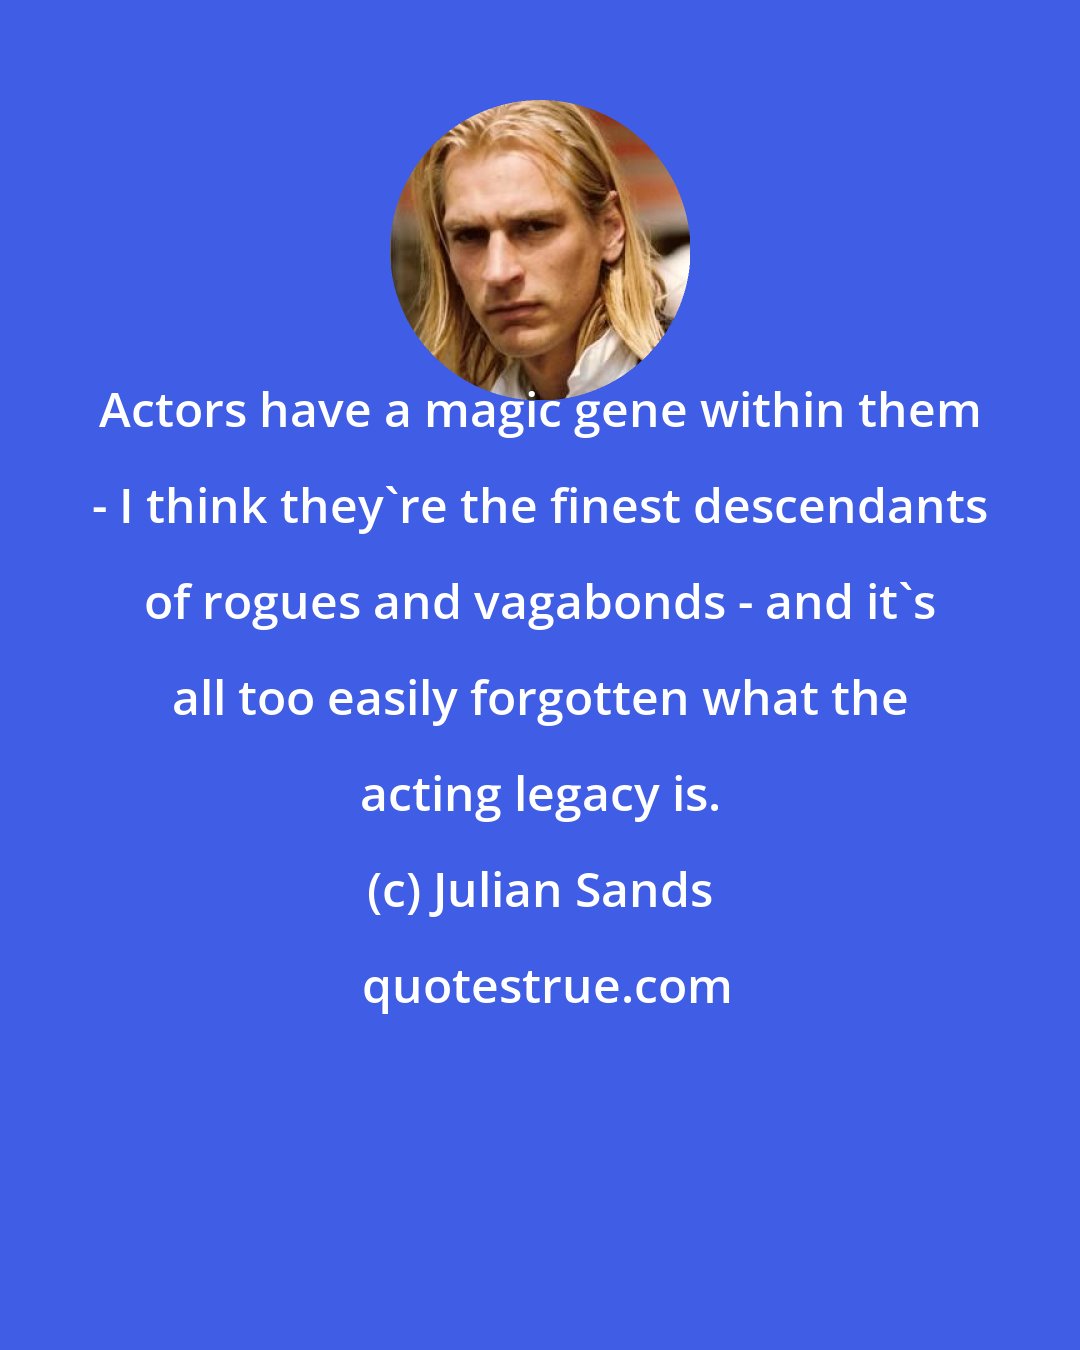 Julian Sands: Actors have a magic gene within them - I think they're the finest descendants of rogues and vagabonds - and it's all too easily forgotten what the acting legacy is.